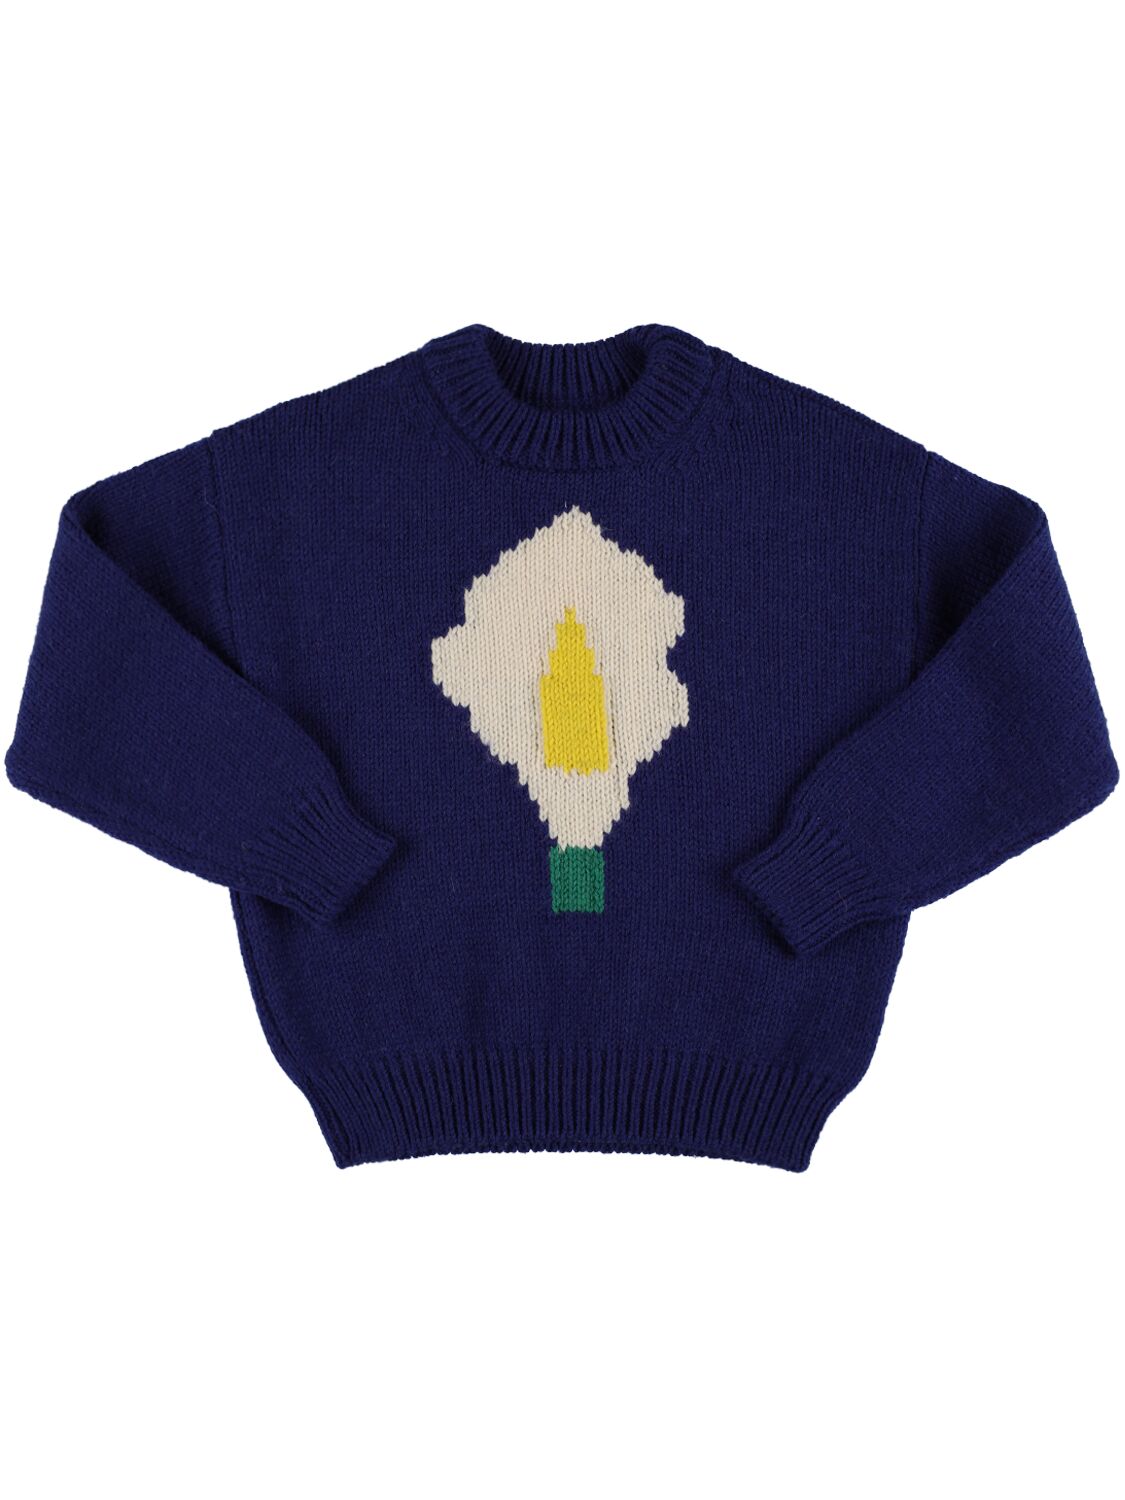 Image of Flower Intarsia Wool Tricot Knit Sweater